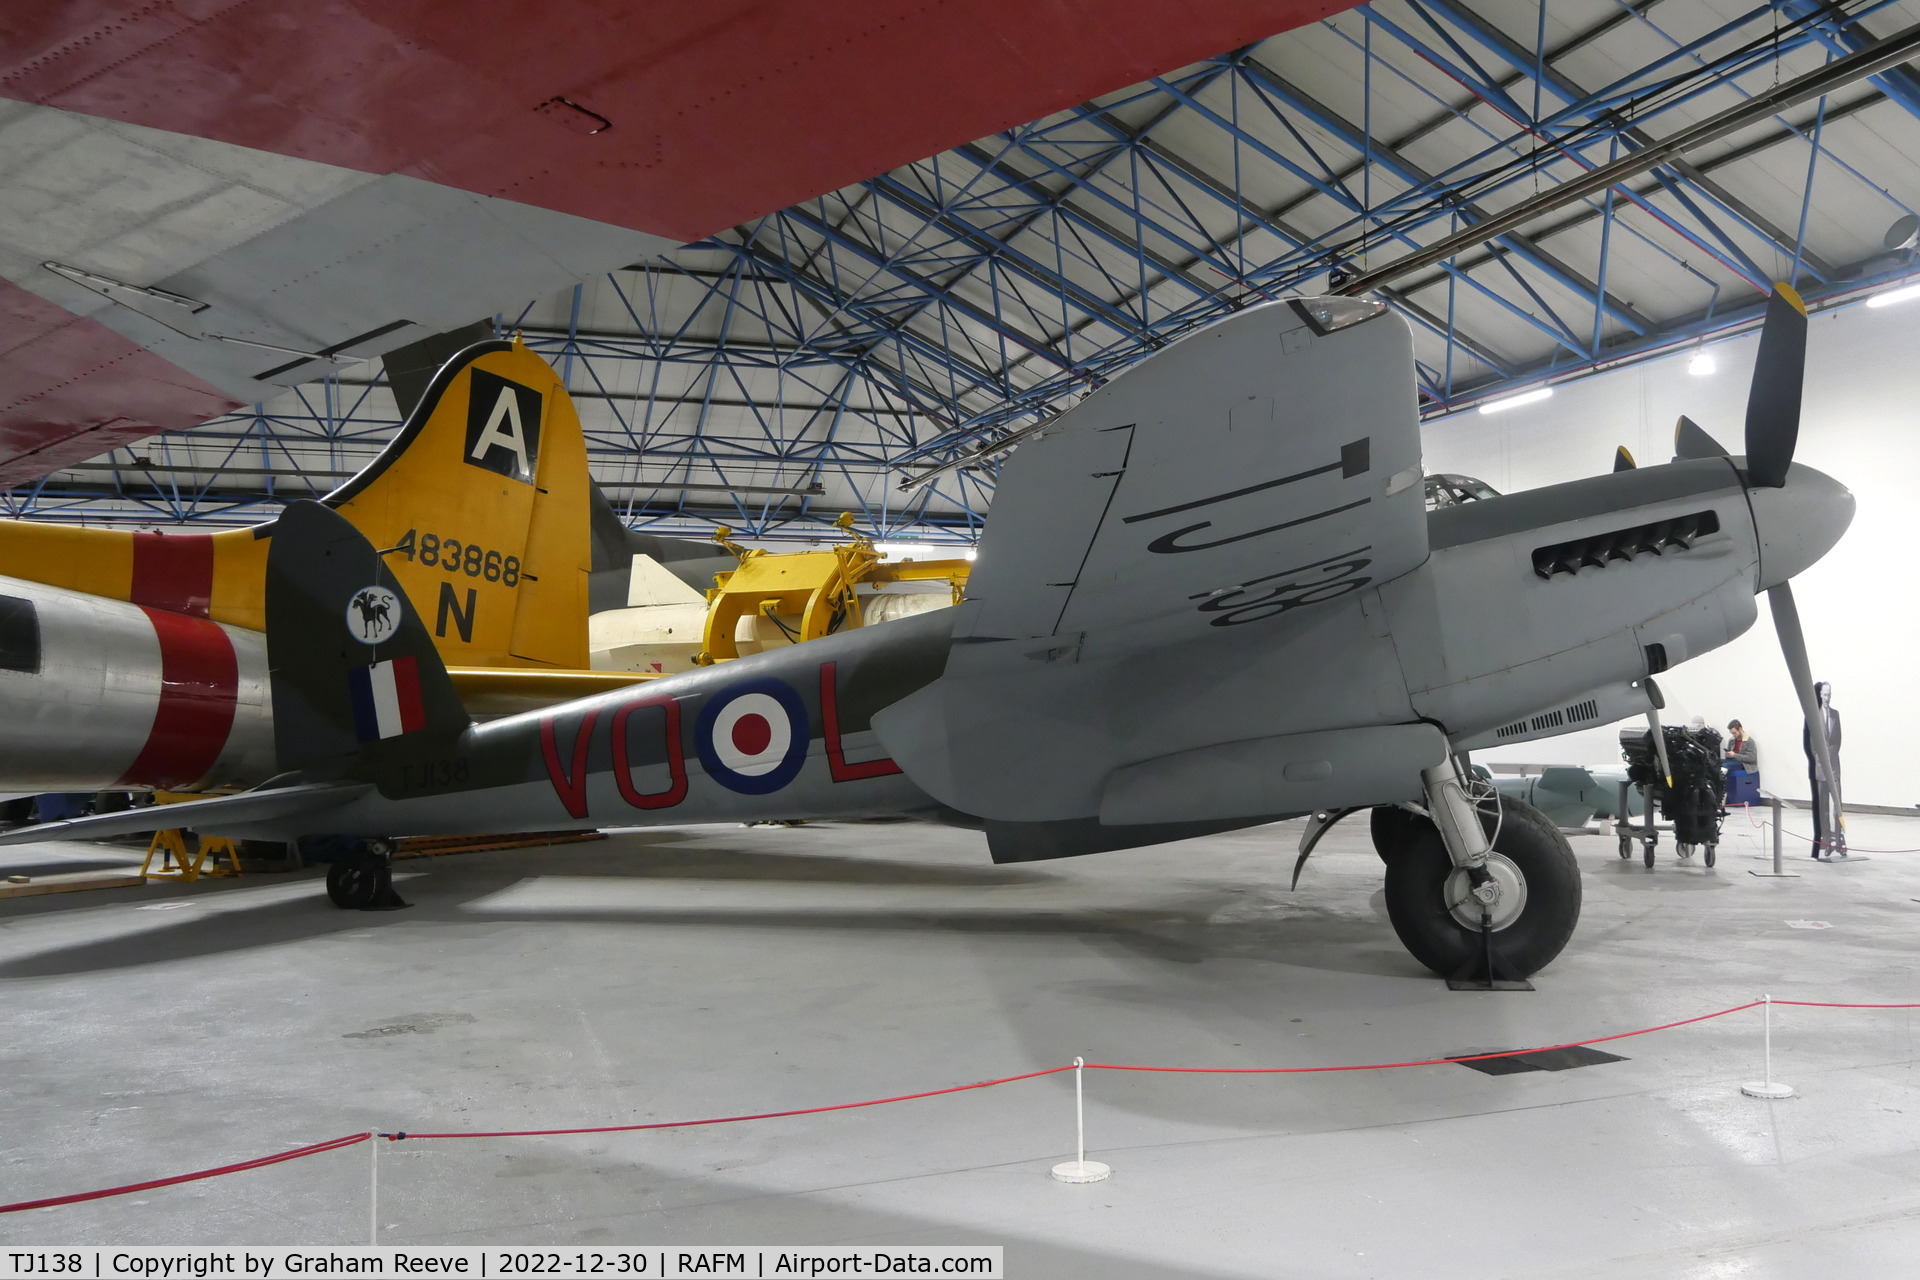 TJ138, De Havilland DH-98 Mosquito TT.35 C/N Not found TJ138, On display at the RAF Museum, Hendon.